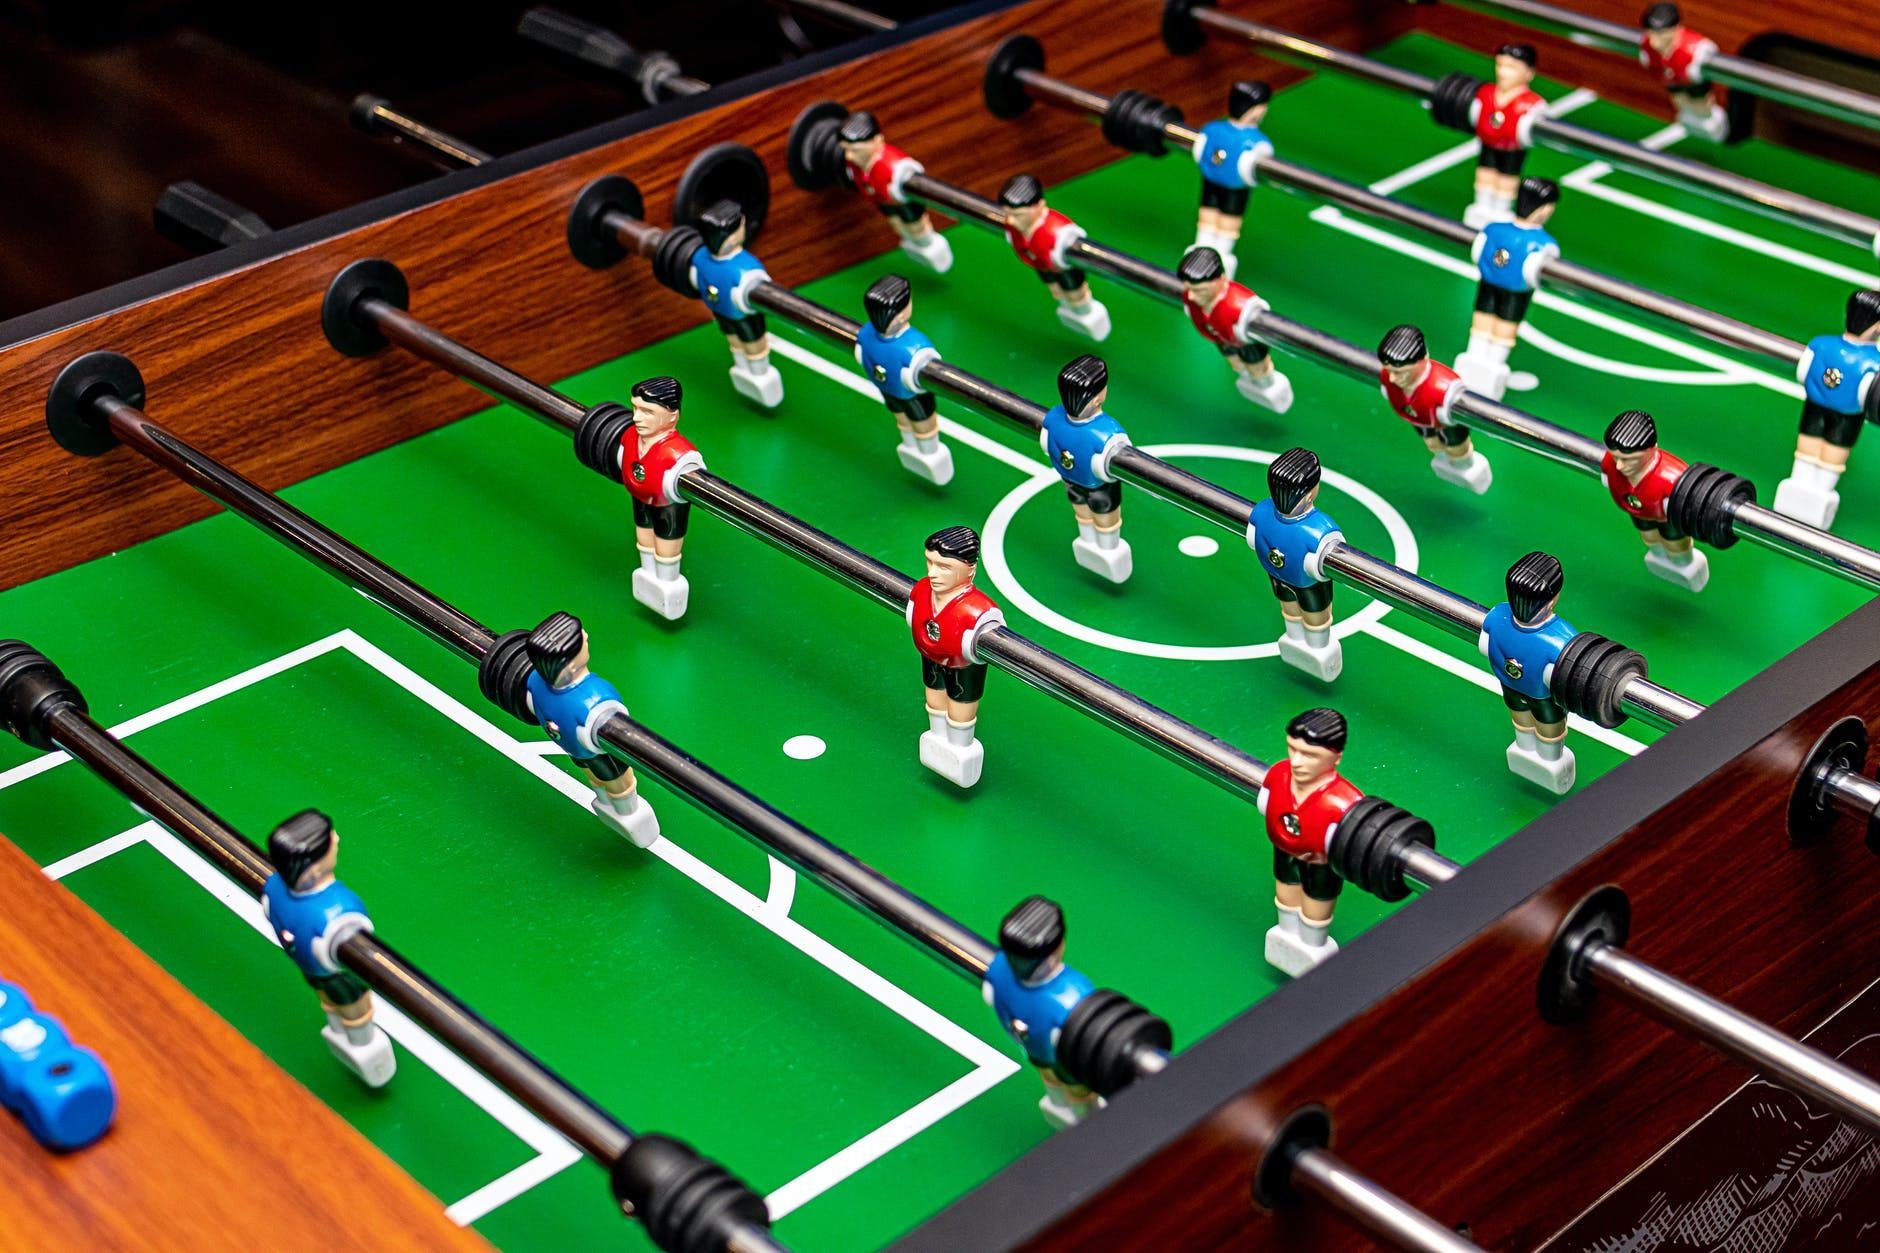 How to choose a Foosball table